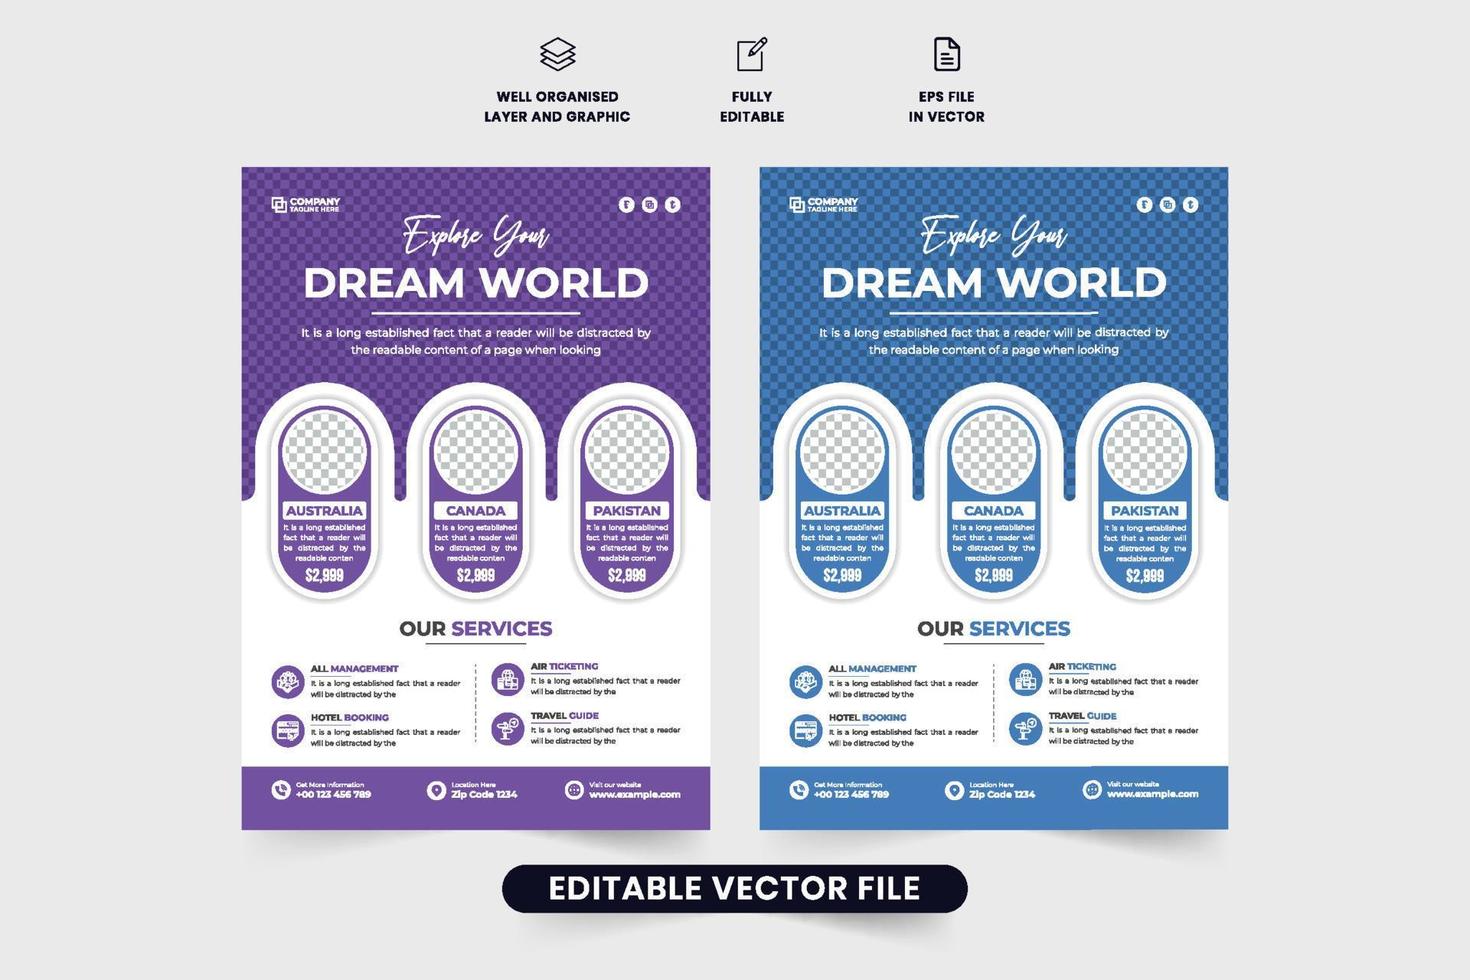 Travel agency flyer template design with purple and blue colors. Touring group promotional flyer vector with photo placeholders. Vacation planner business advertisement poster or flyer vector.